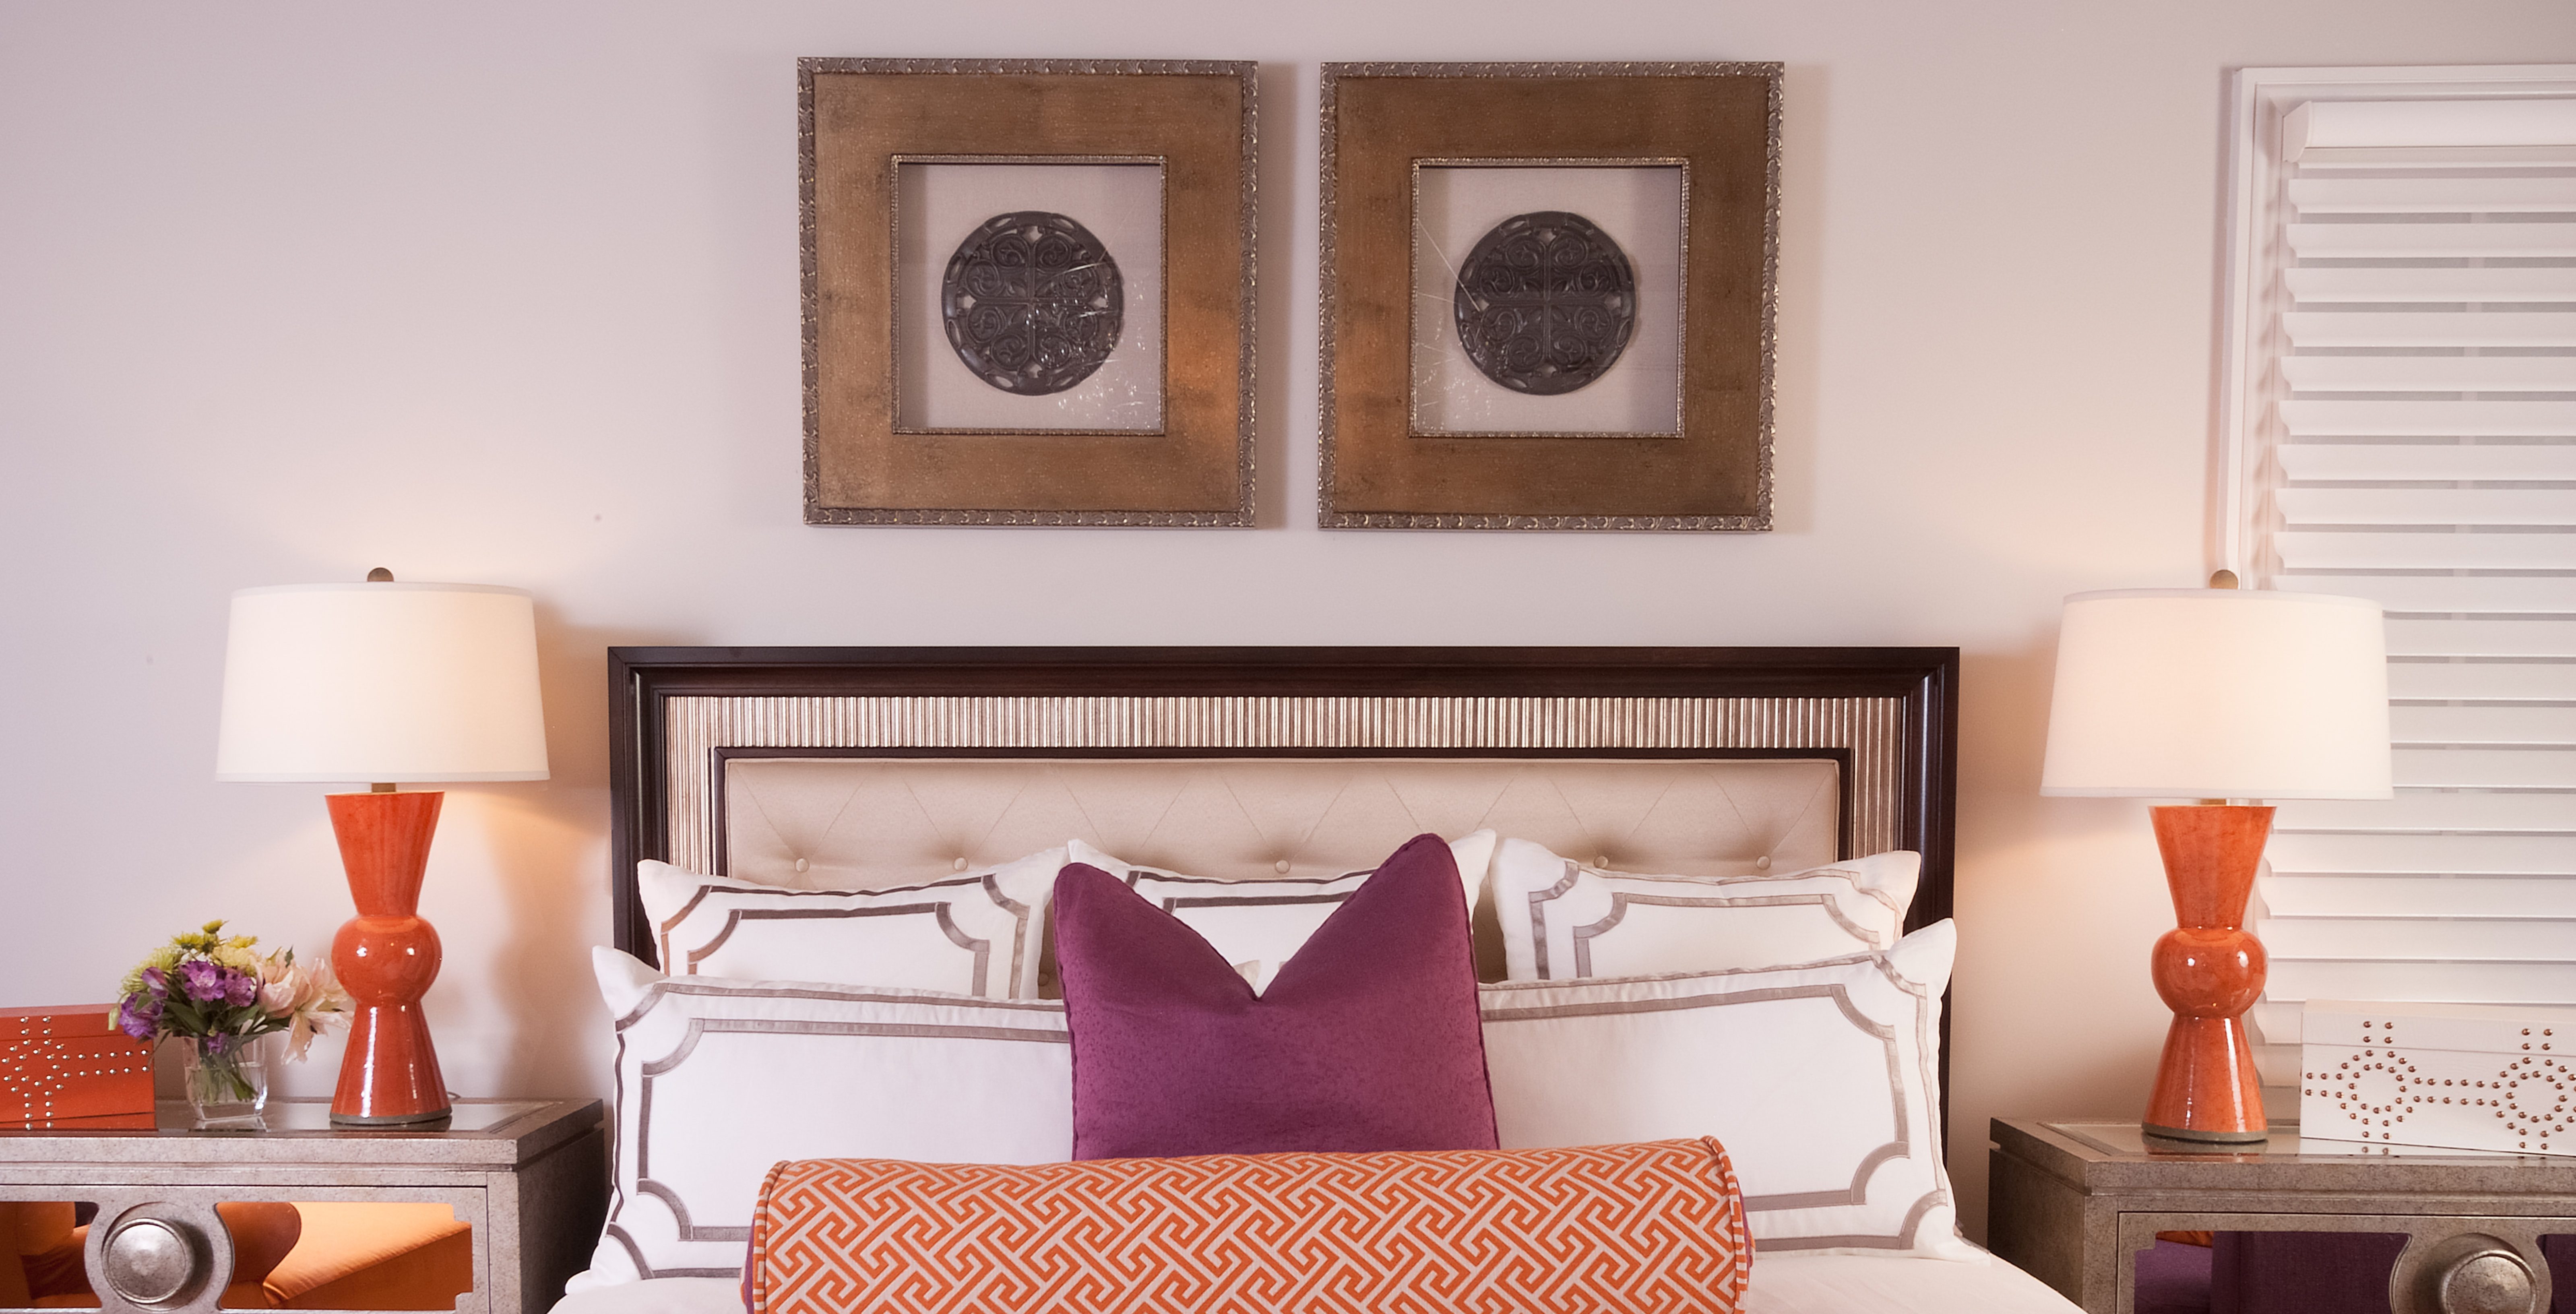 6 fun ways to accent a bedroom wall